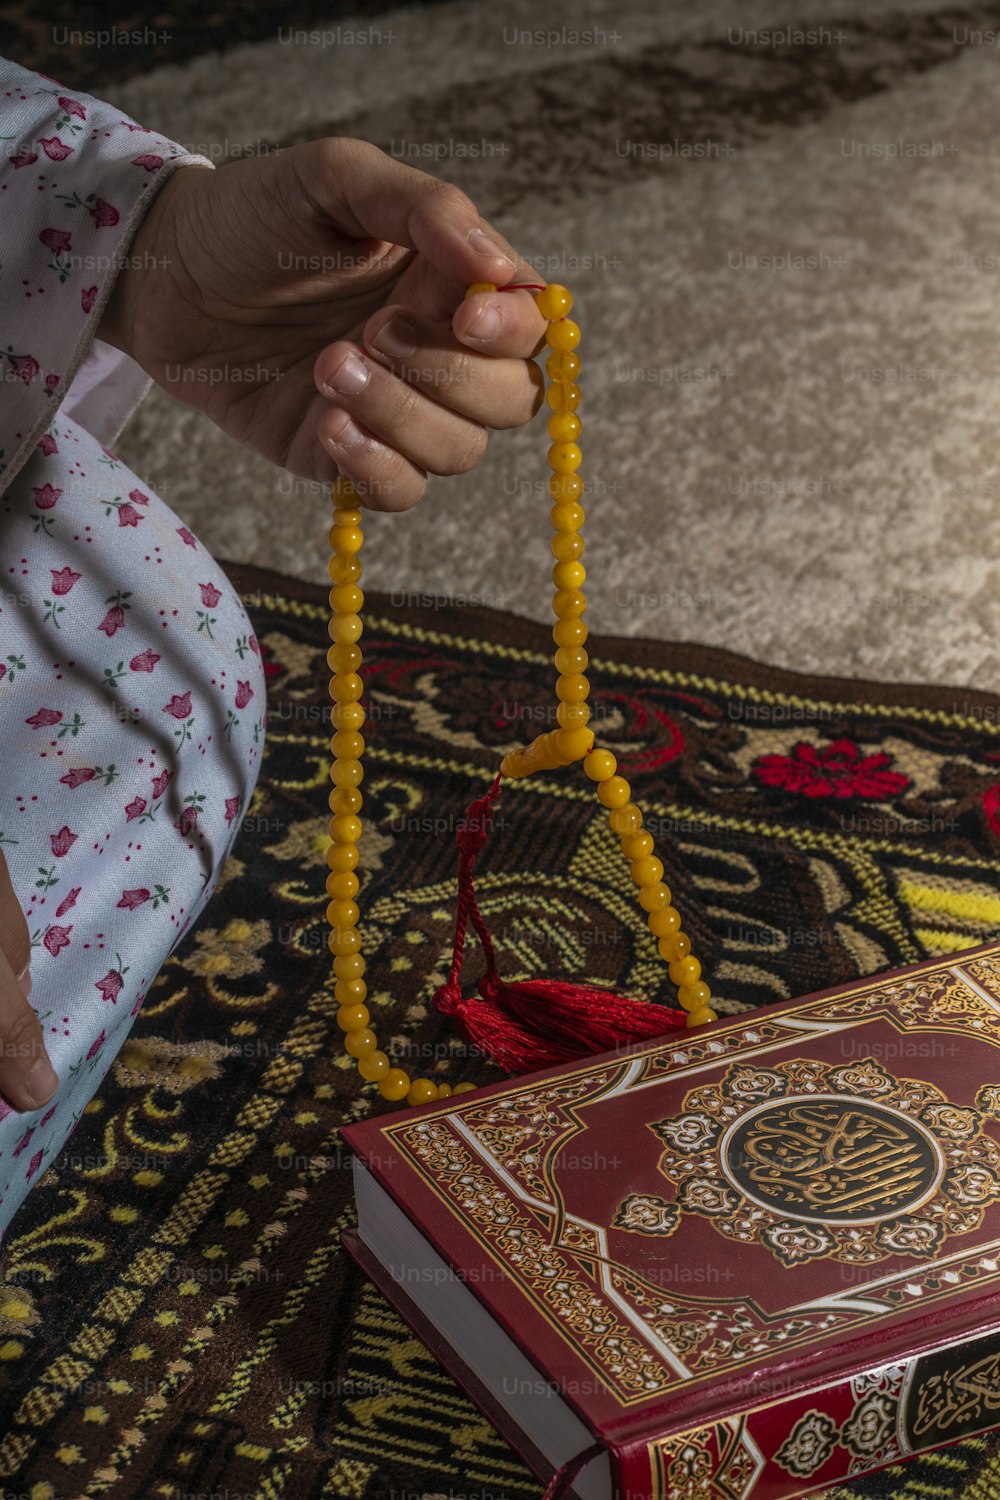 a person holding a beaded rosary next to a book